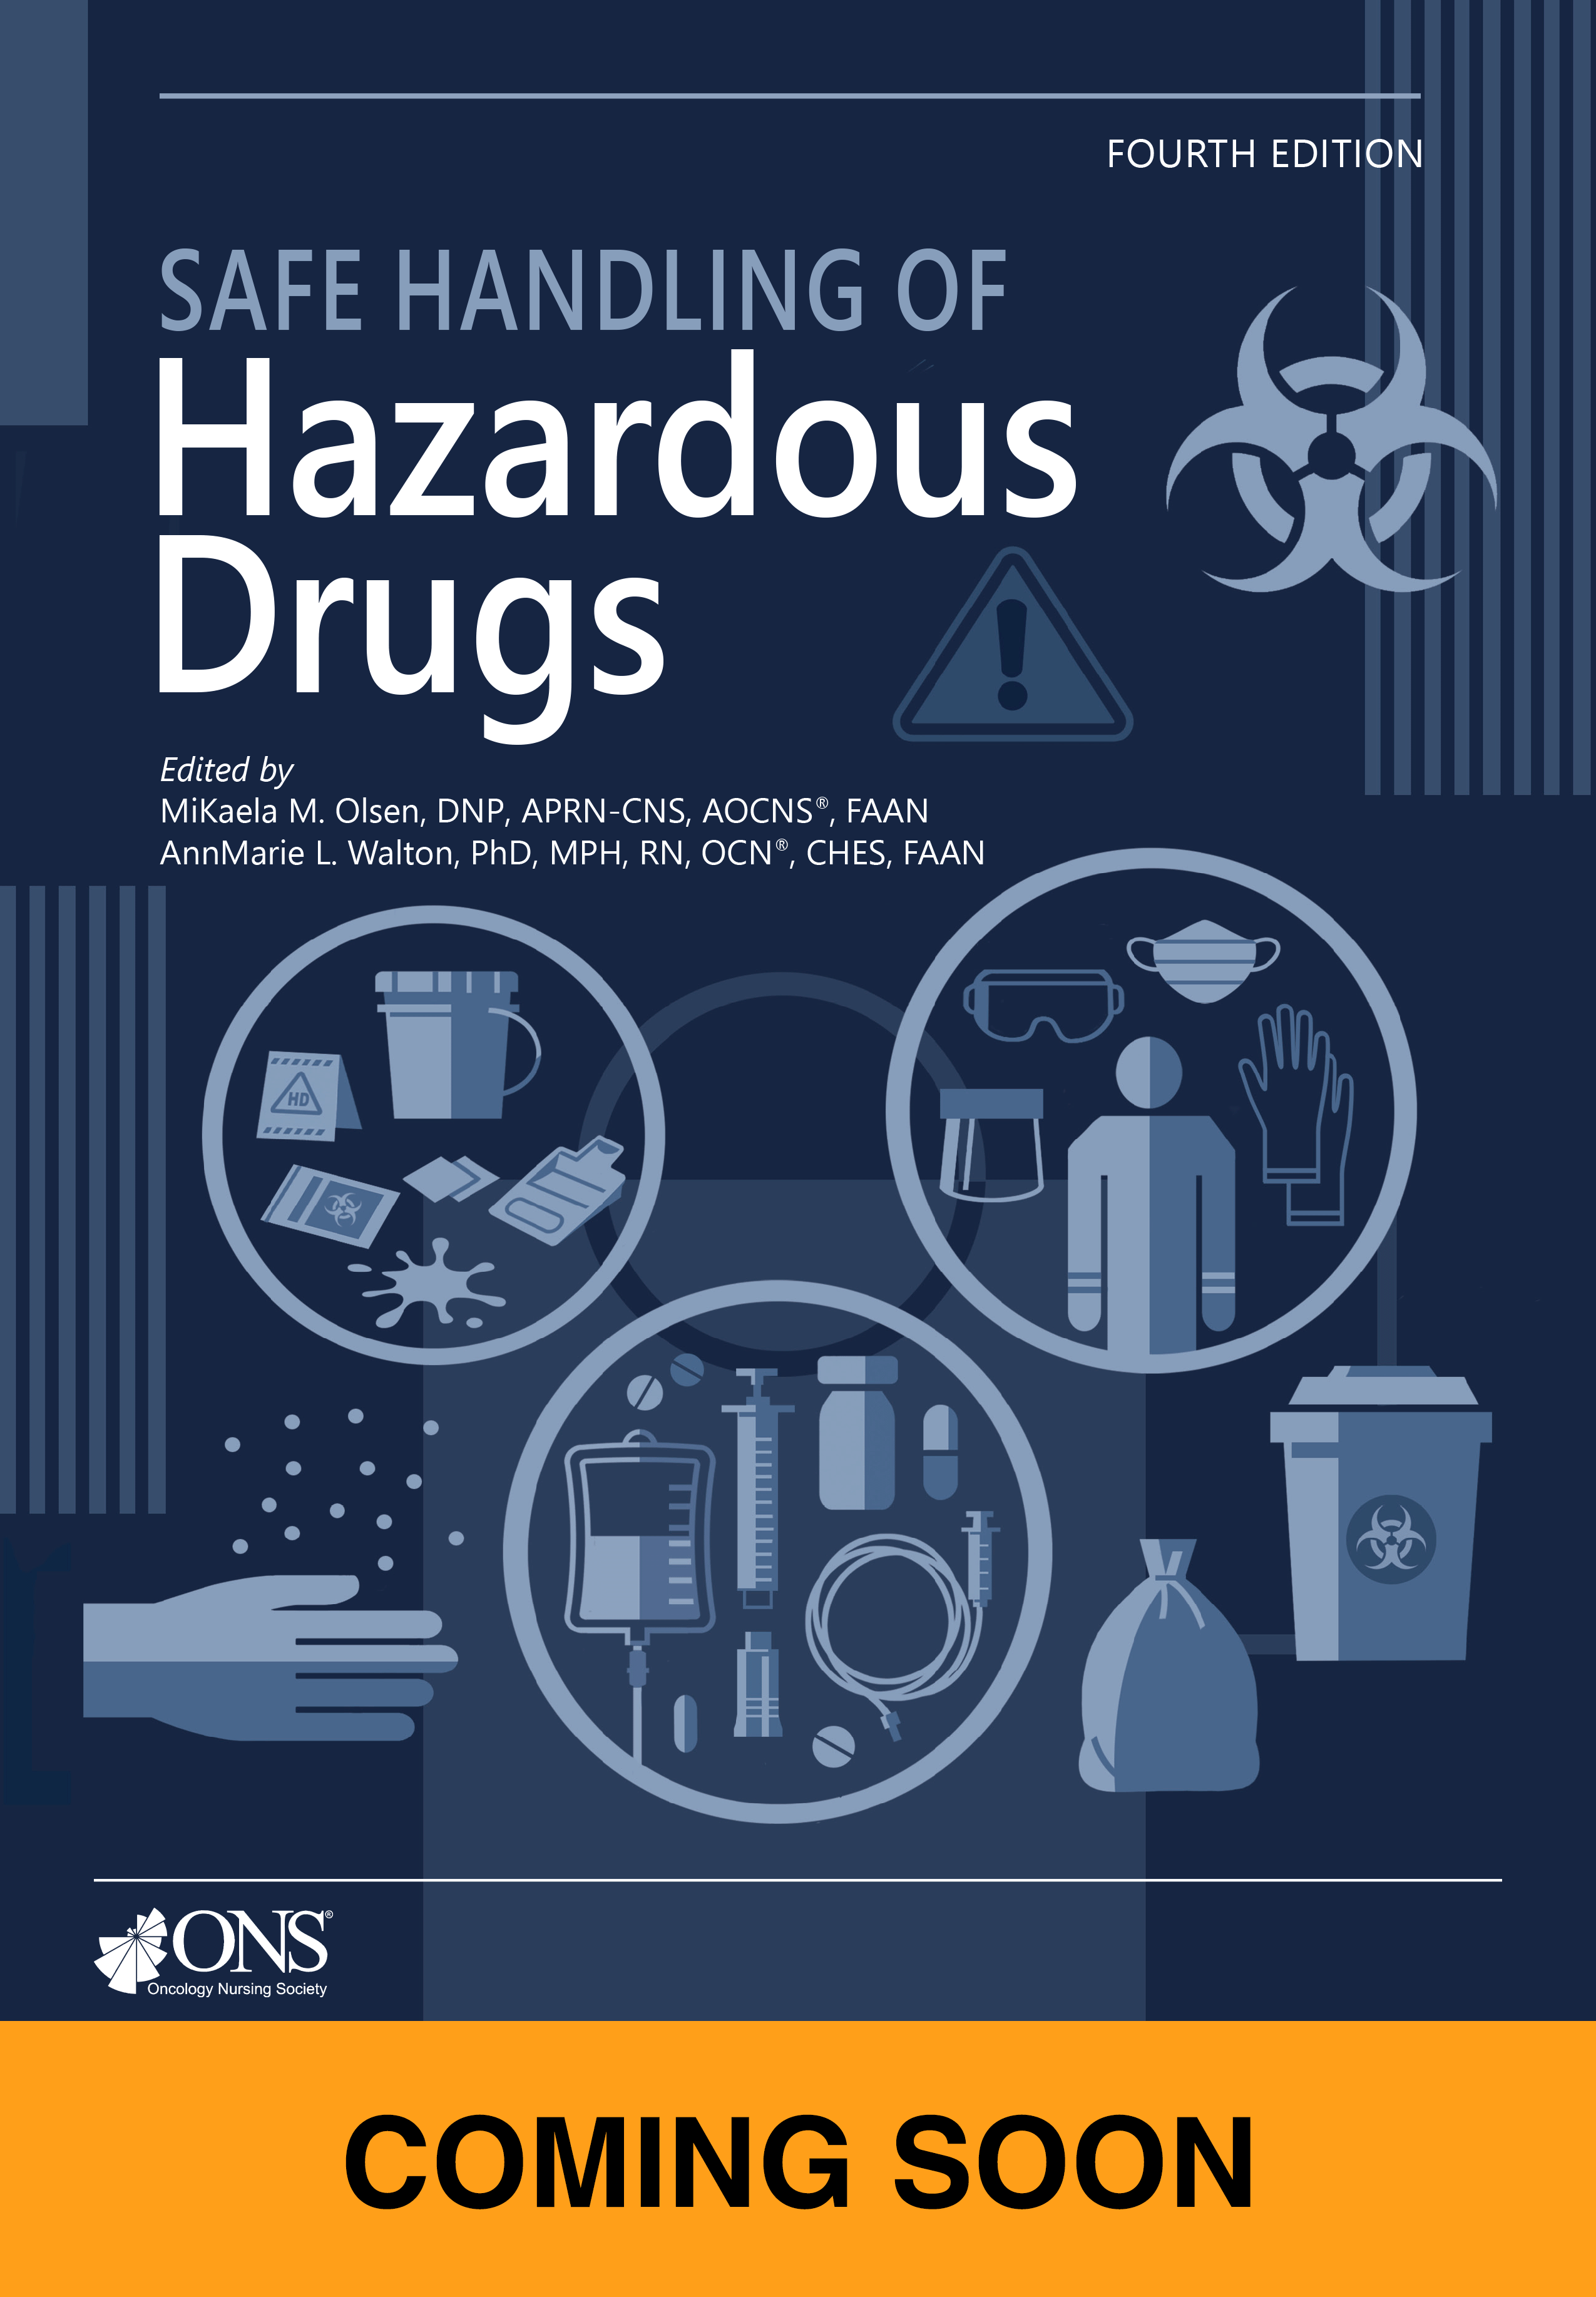 Safe Handling of Hazardous Drugs (Fourth Edition Coming Soon) 